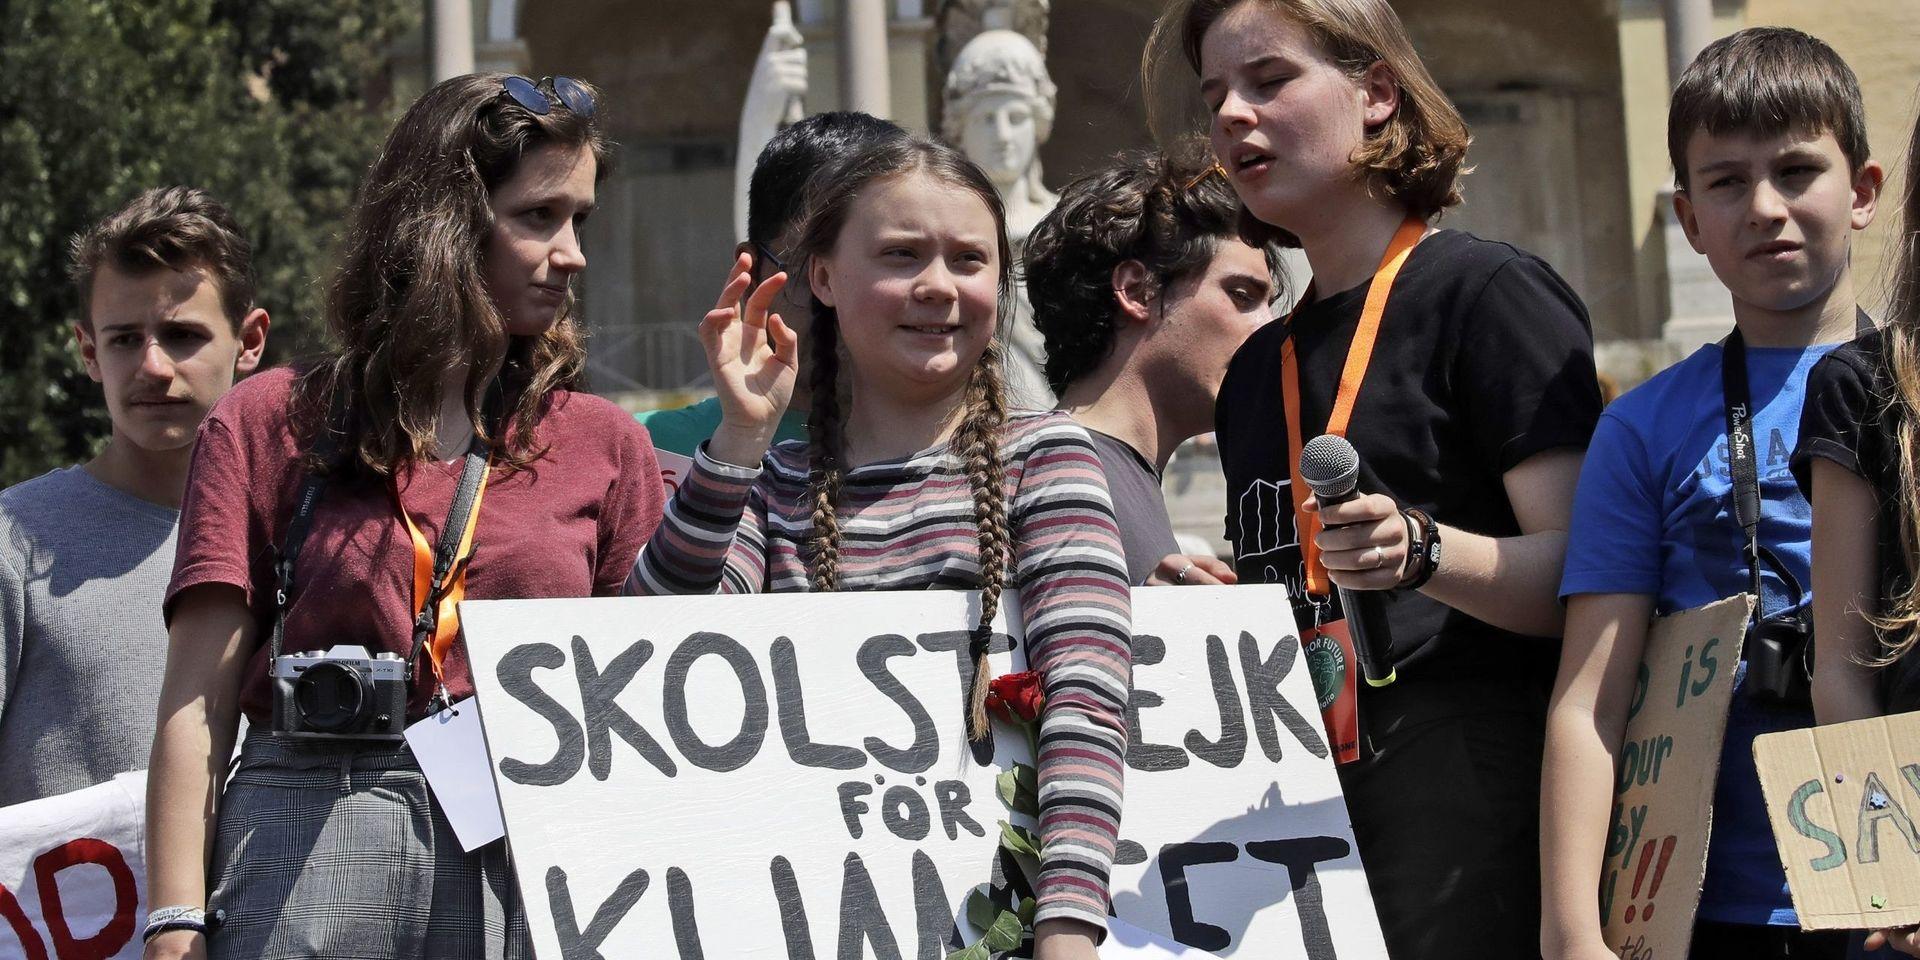 Swedish teenager and environmental activist Greta Thunberg waves as she holds a sign with writing reading in Swedish &quot;School strike for the climate&quot; during a Fridays for Future rally demanding more action be taken to save the environment, in Rome, Friday, April 19, 2019. Thunberg was in Rome to headline Friday&apos;s &quot;school strike,&quot; the growing worldwide youth movement she spearheaded, demanding faster action against climate change.(AP Photo/Alessandra Tarantino)